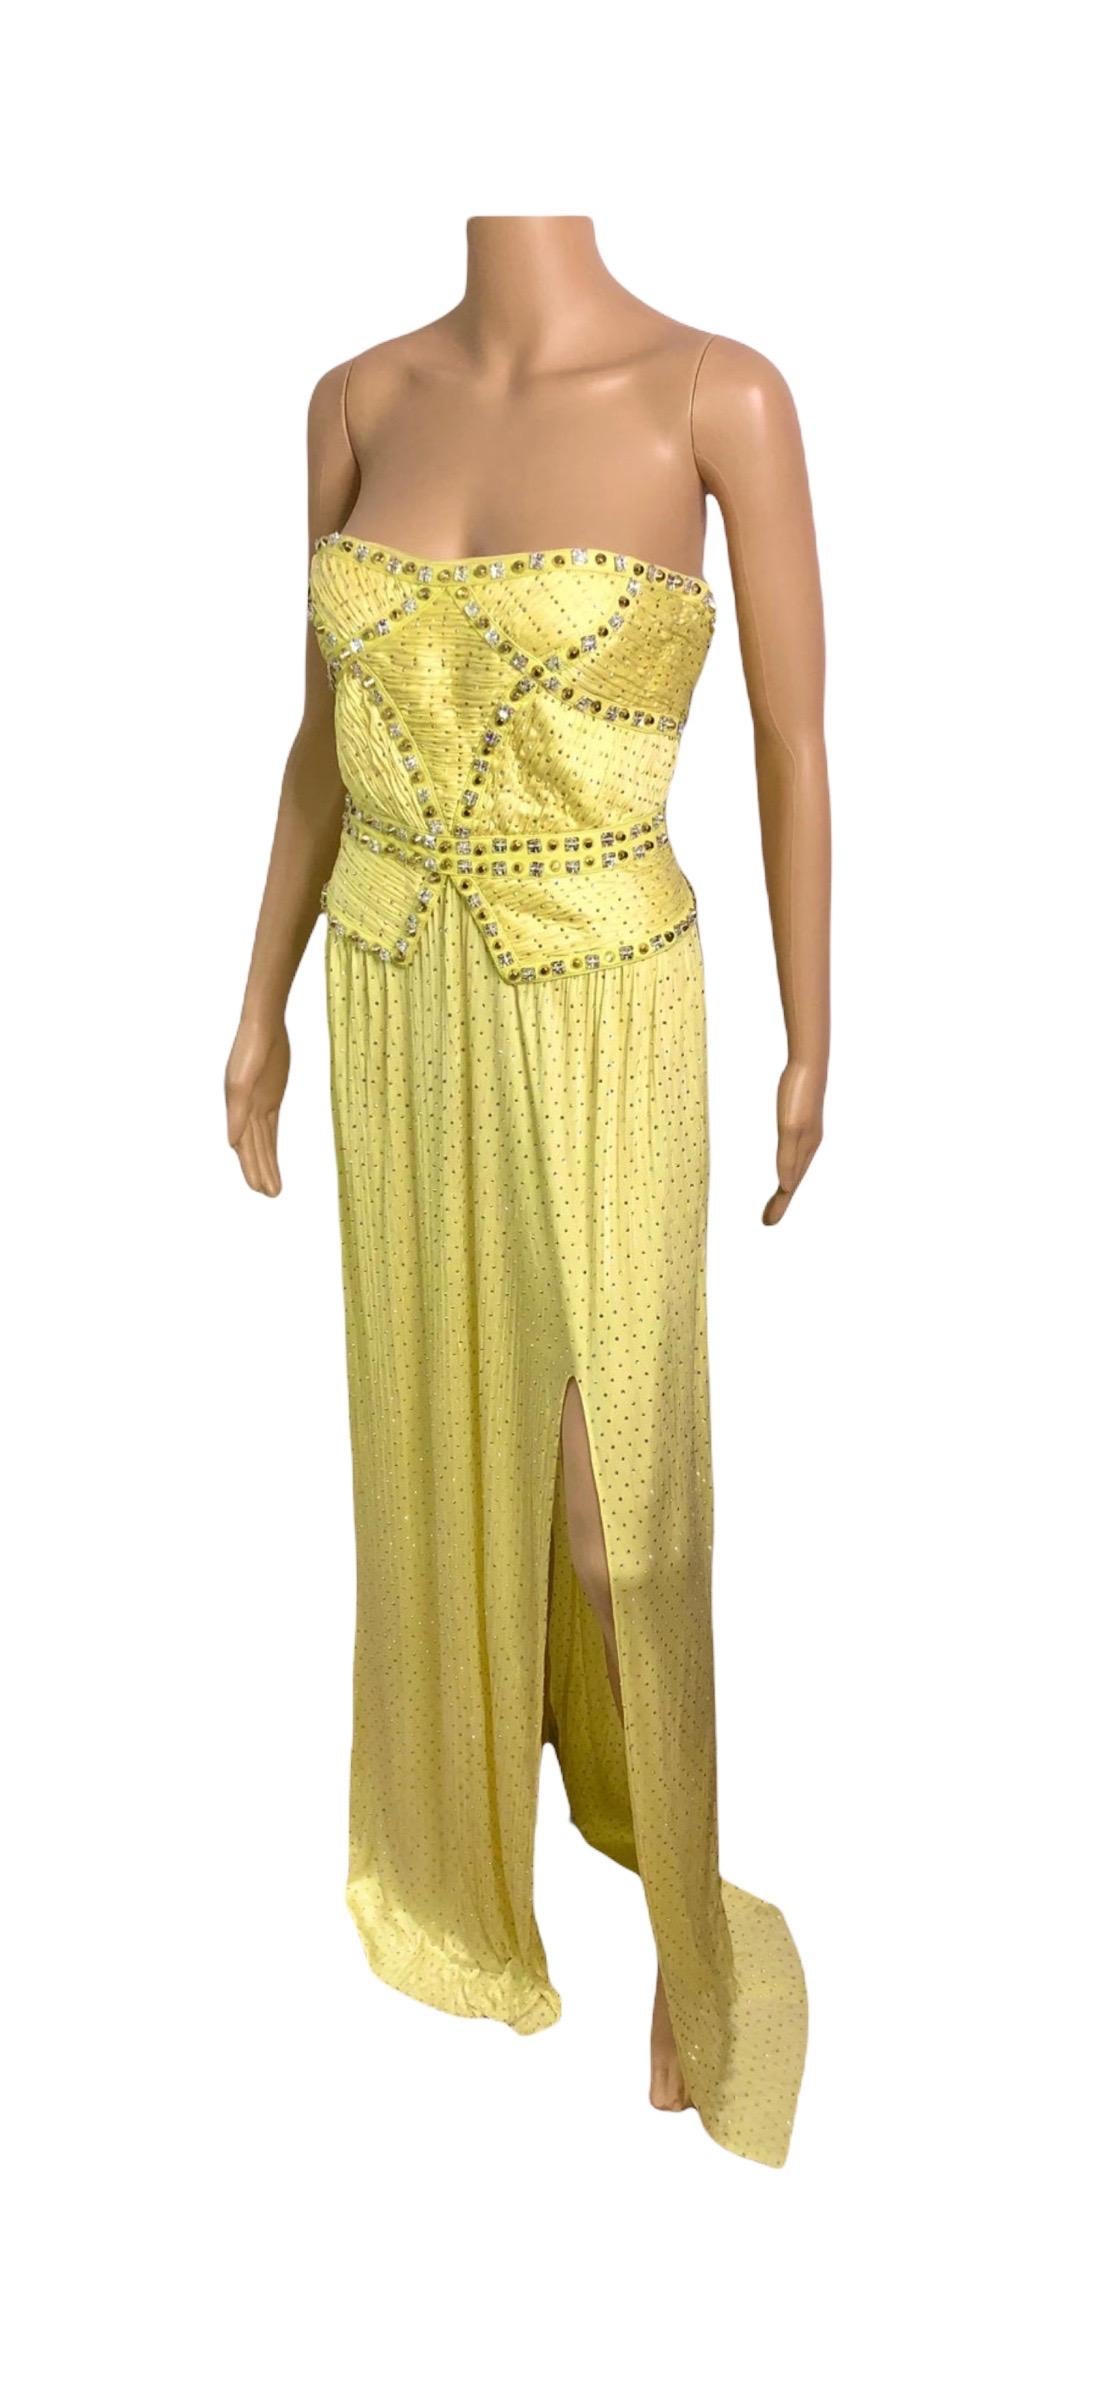 Versace S/S 2012 Runway Bustier Corset Crystal Embellished Evening Dress Gown  For Sale 4